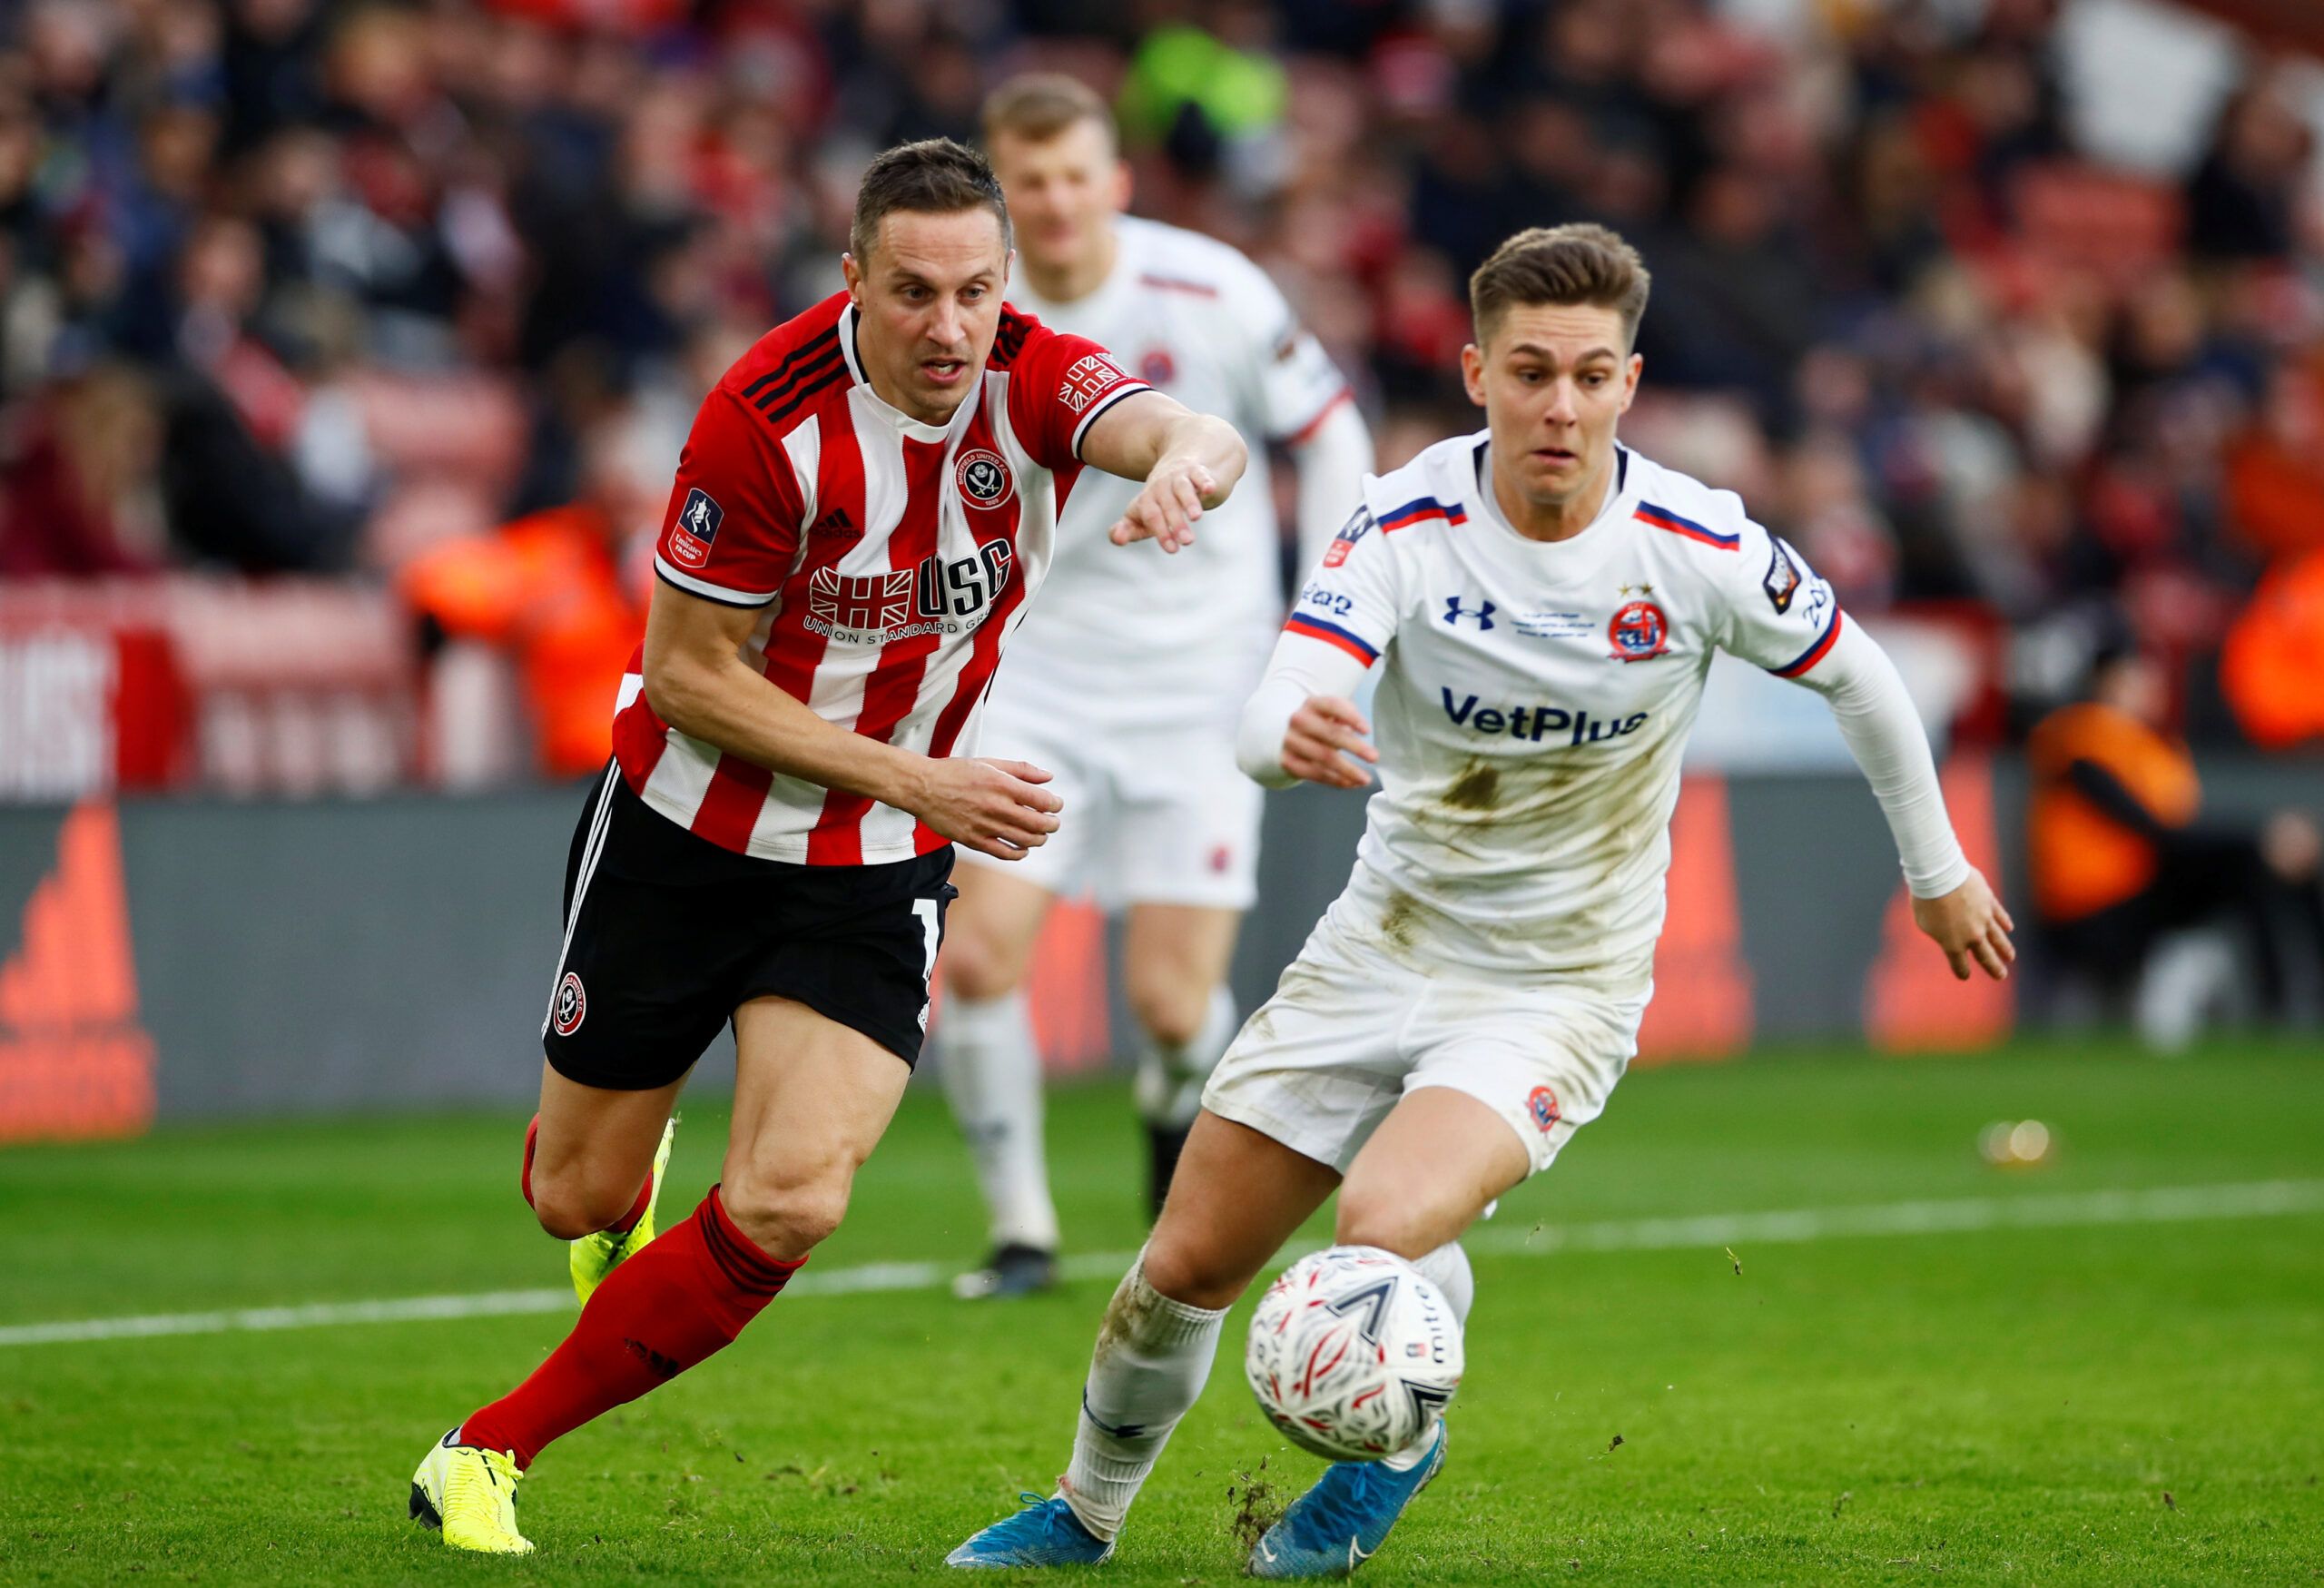 Soccer Football - FA Cup - Third Round - Sheffield United v AFC Fylde - Bramall Lane, Sheffield, Britain - January 5, 2020  Sheffield United's Phil Jagielka in action with AFC Fylde's Nick Haughton   Action Images via Reuters/Jason Cairnduff